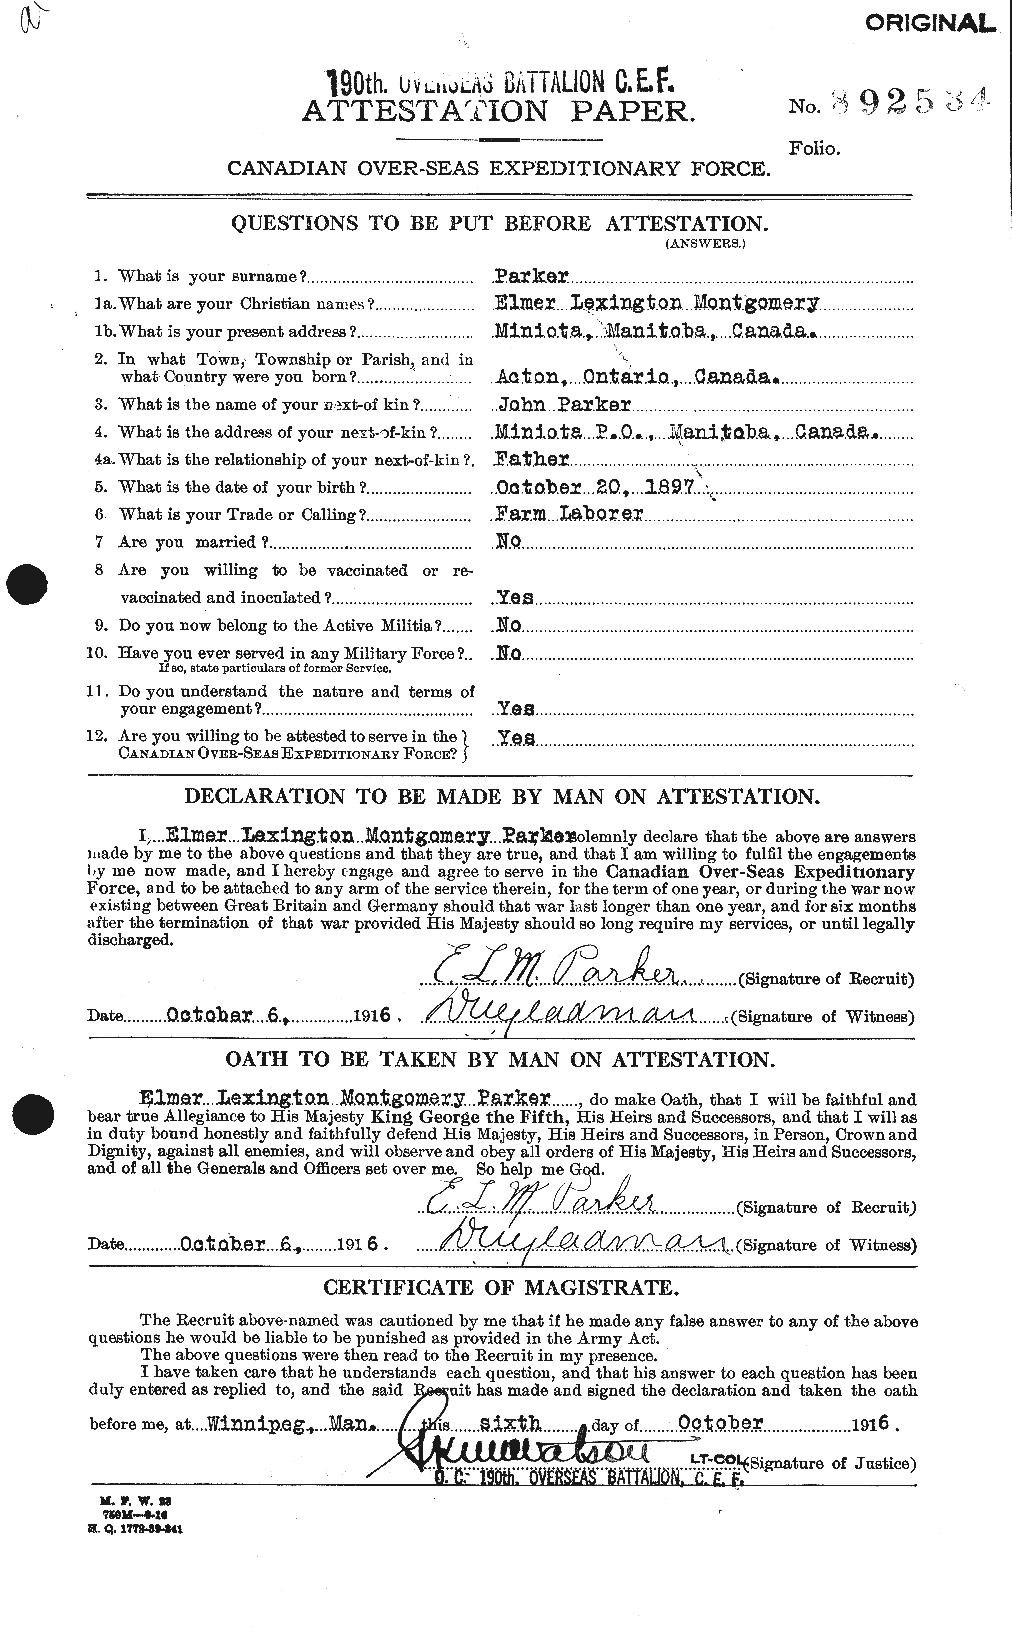 Personnel Records of the First World War - CEF 565145a